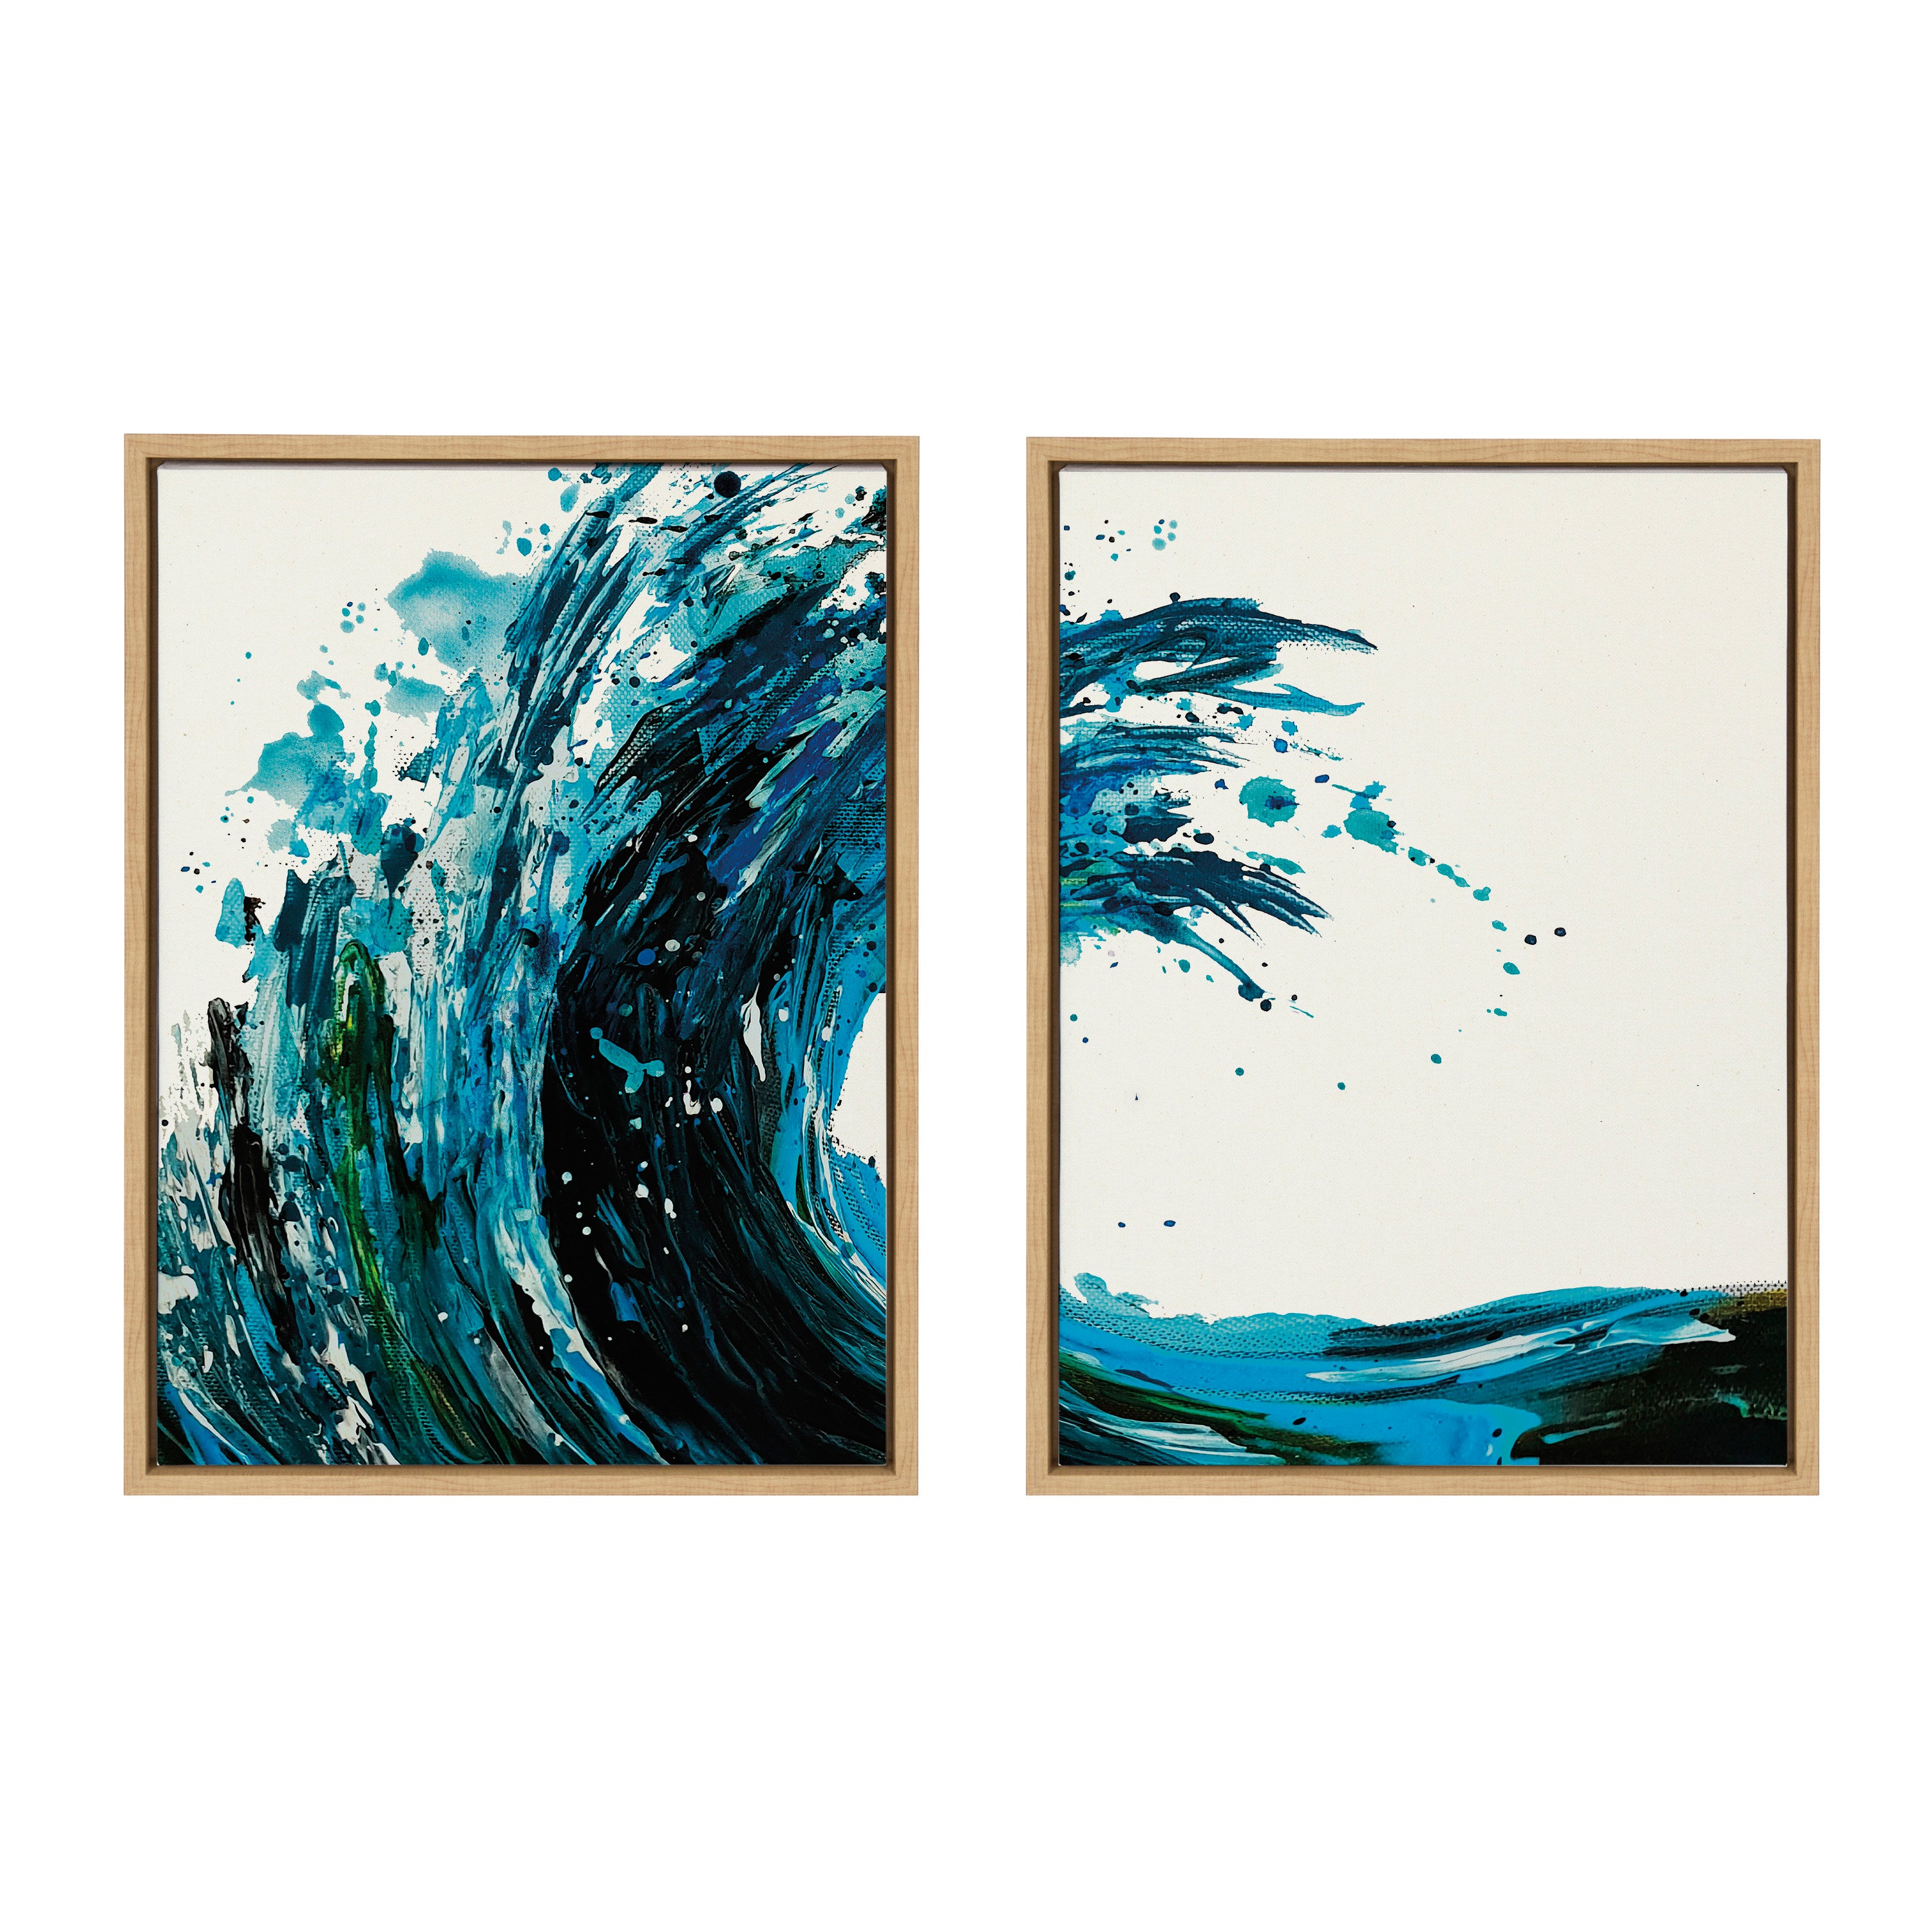 Sylvie Wave 1 and 2 Framed Canvas Art Set by